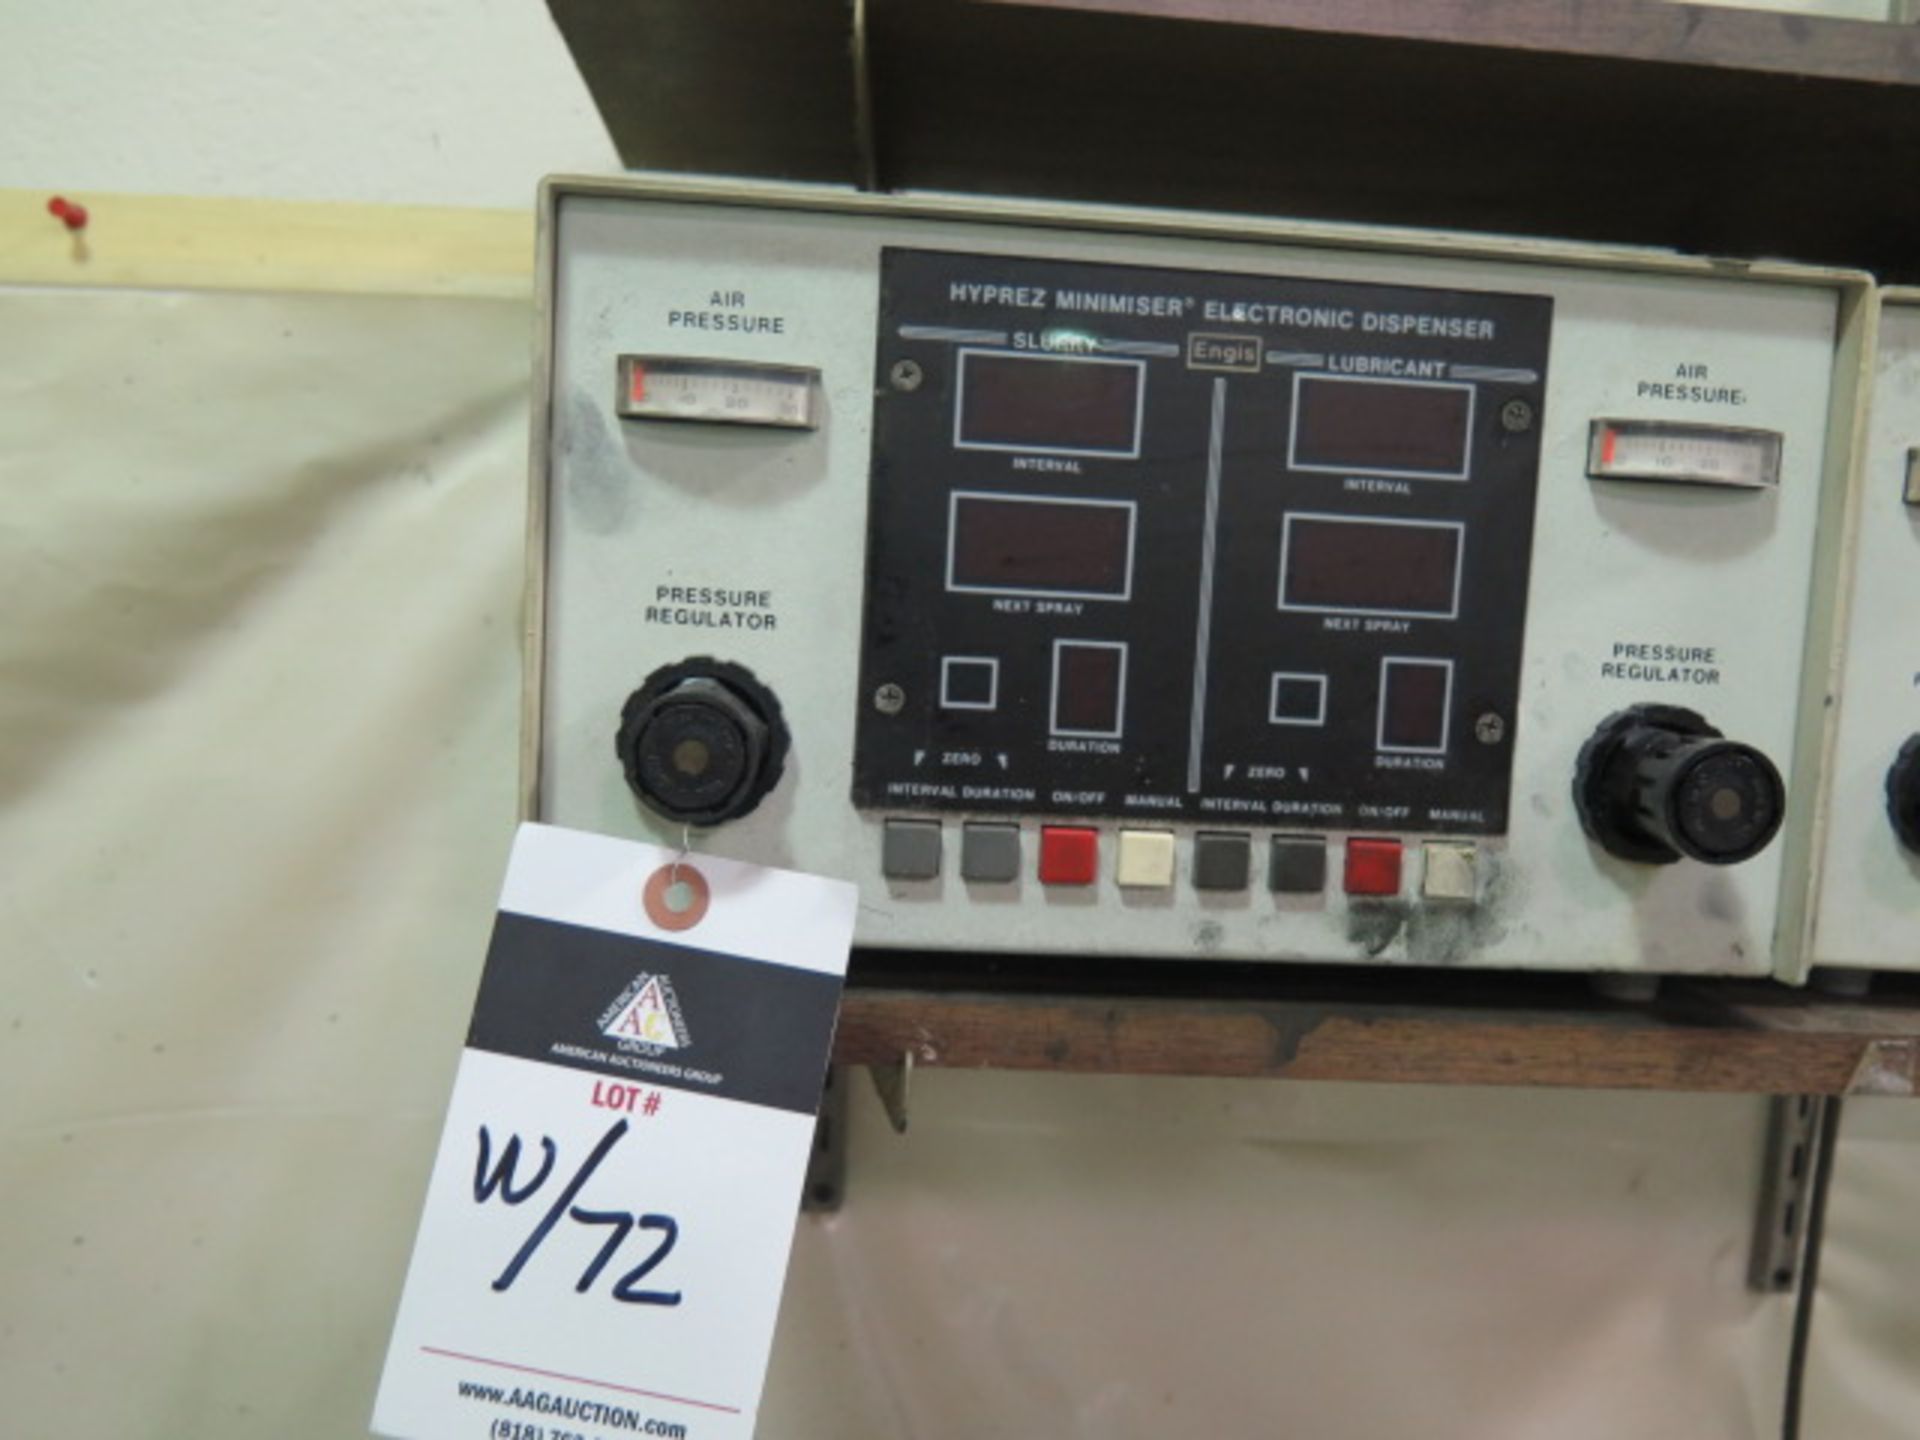 Engis Corp “Hyprex Lapping System” s/n 726LM15 w/ Engis Digital Controls, 15” Lapping Plate, - Image 7 of 10